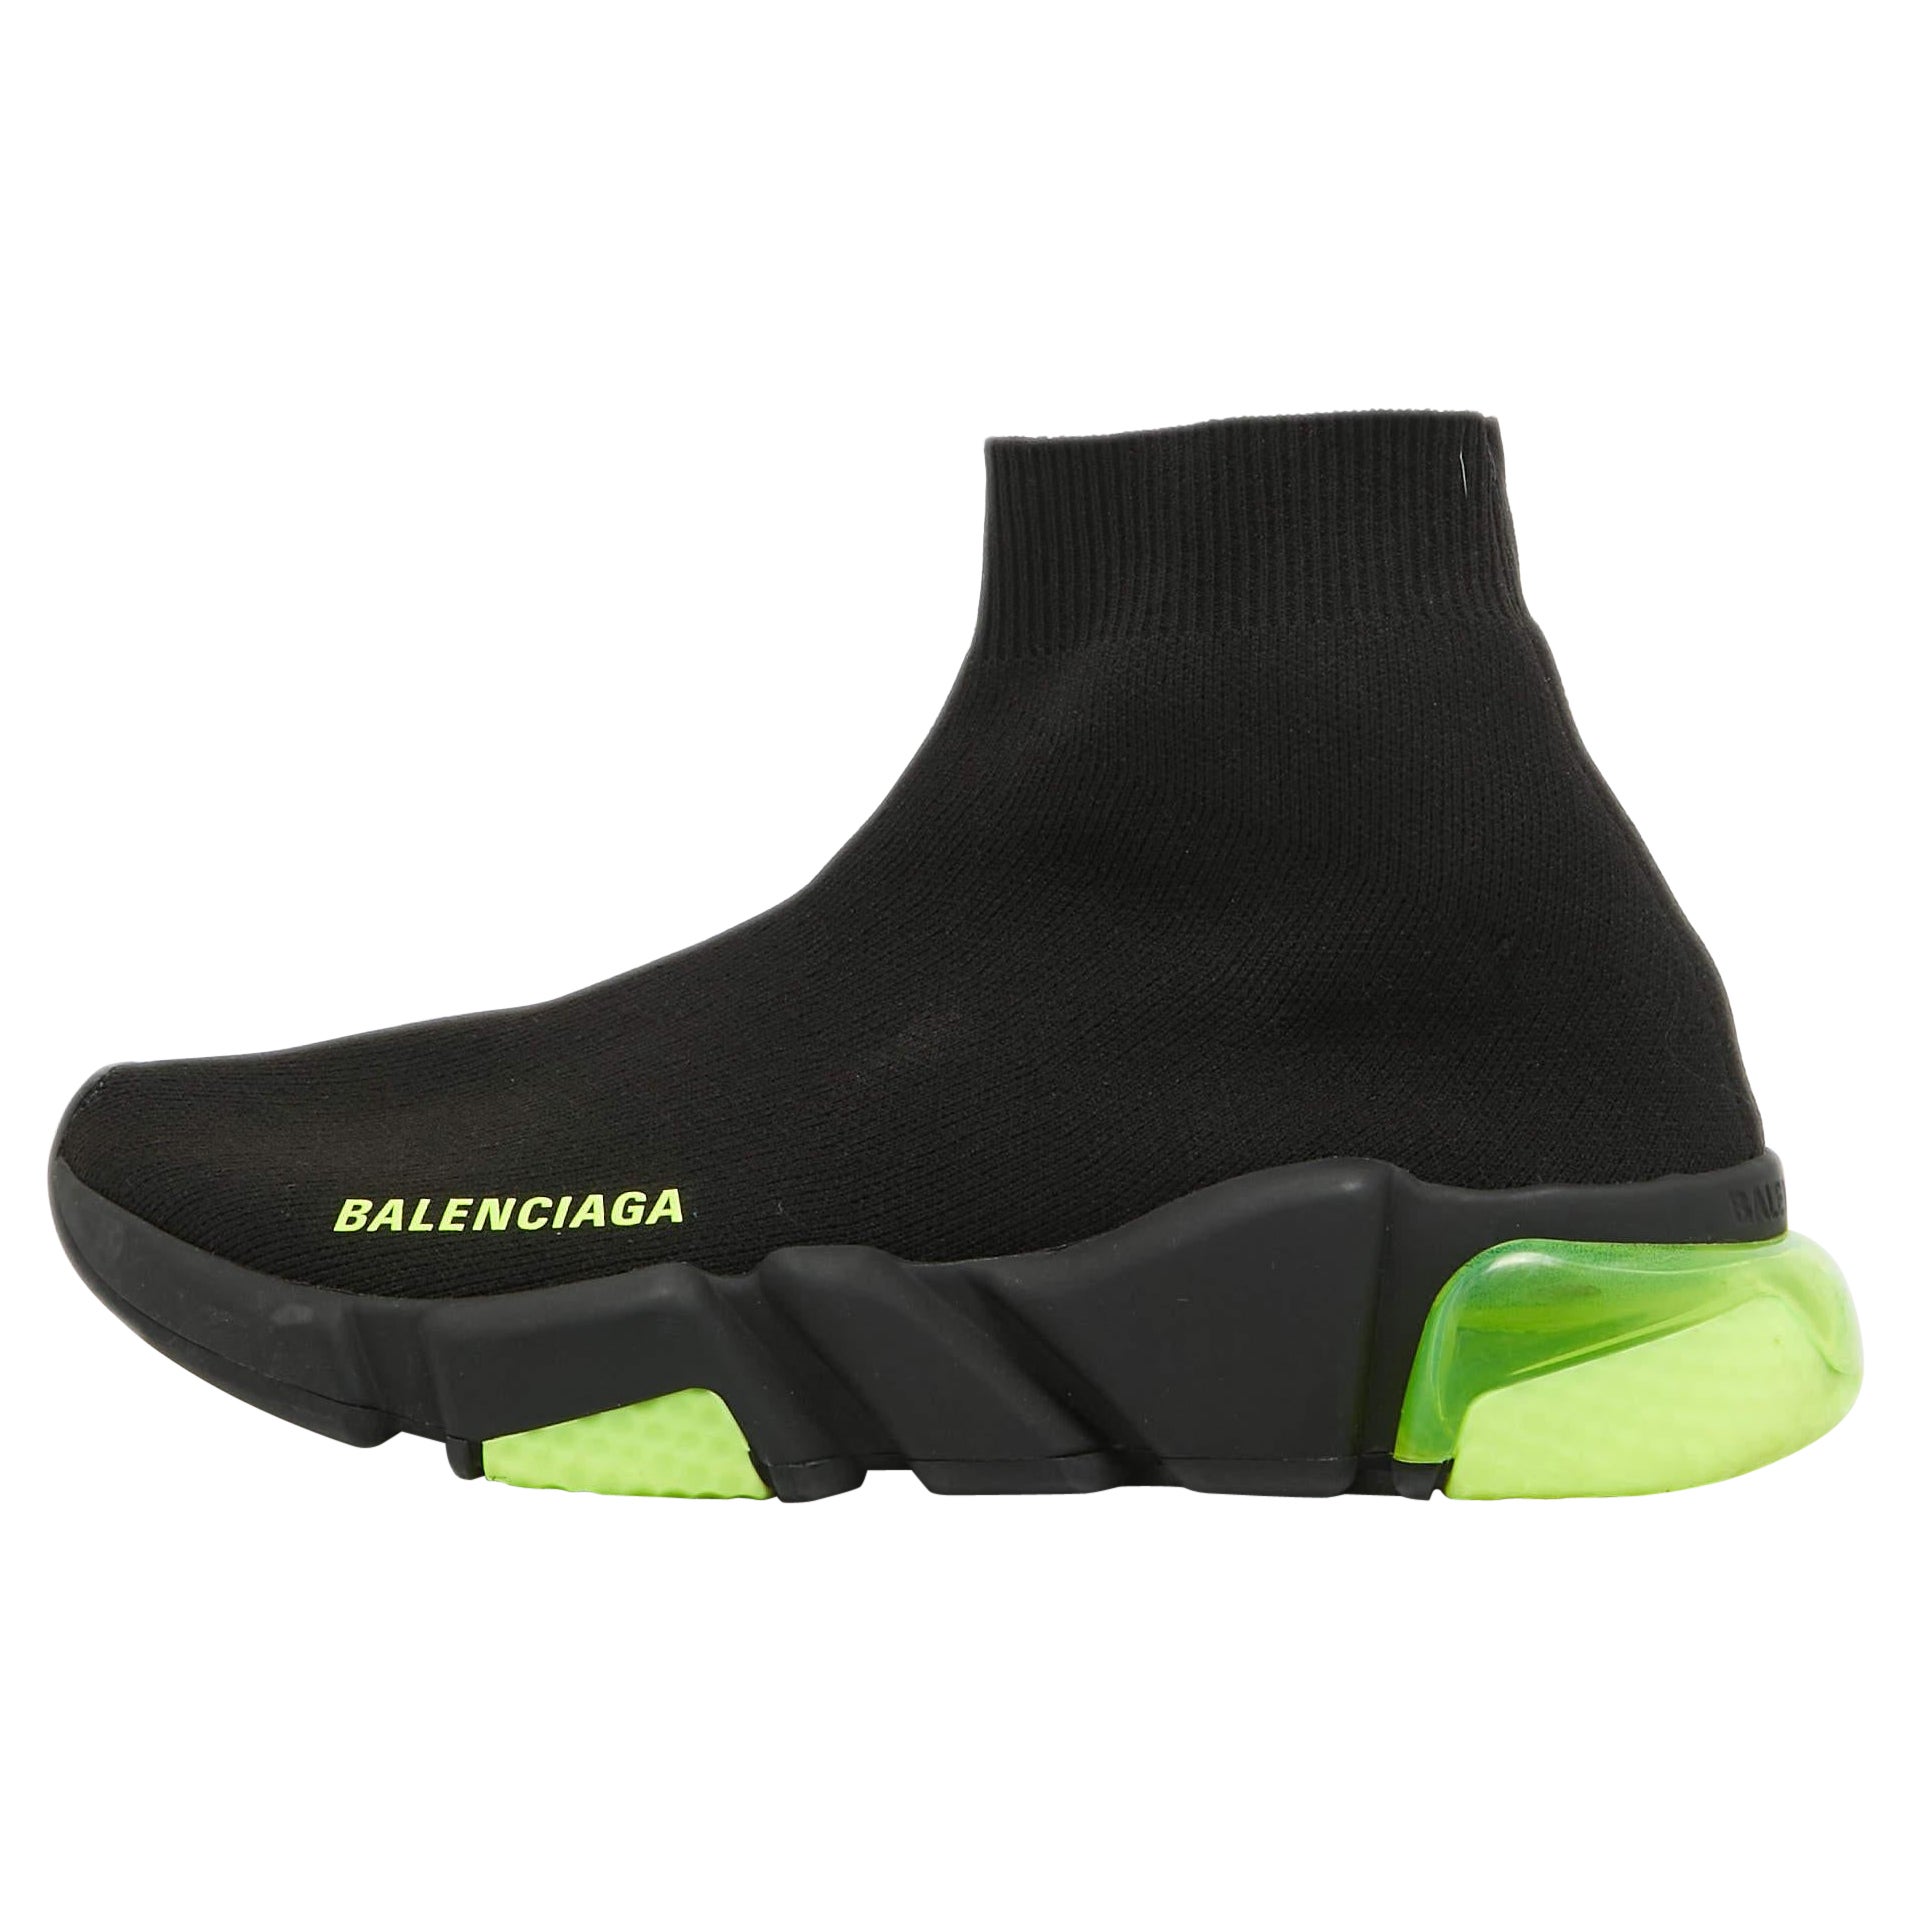 Balenciaga Black Knit Fabric Speed Trainer High Top Sneakers Size 36 For Sale